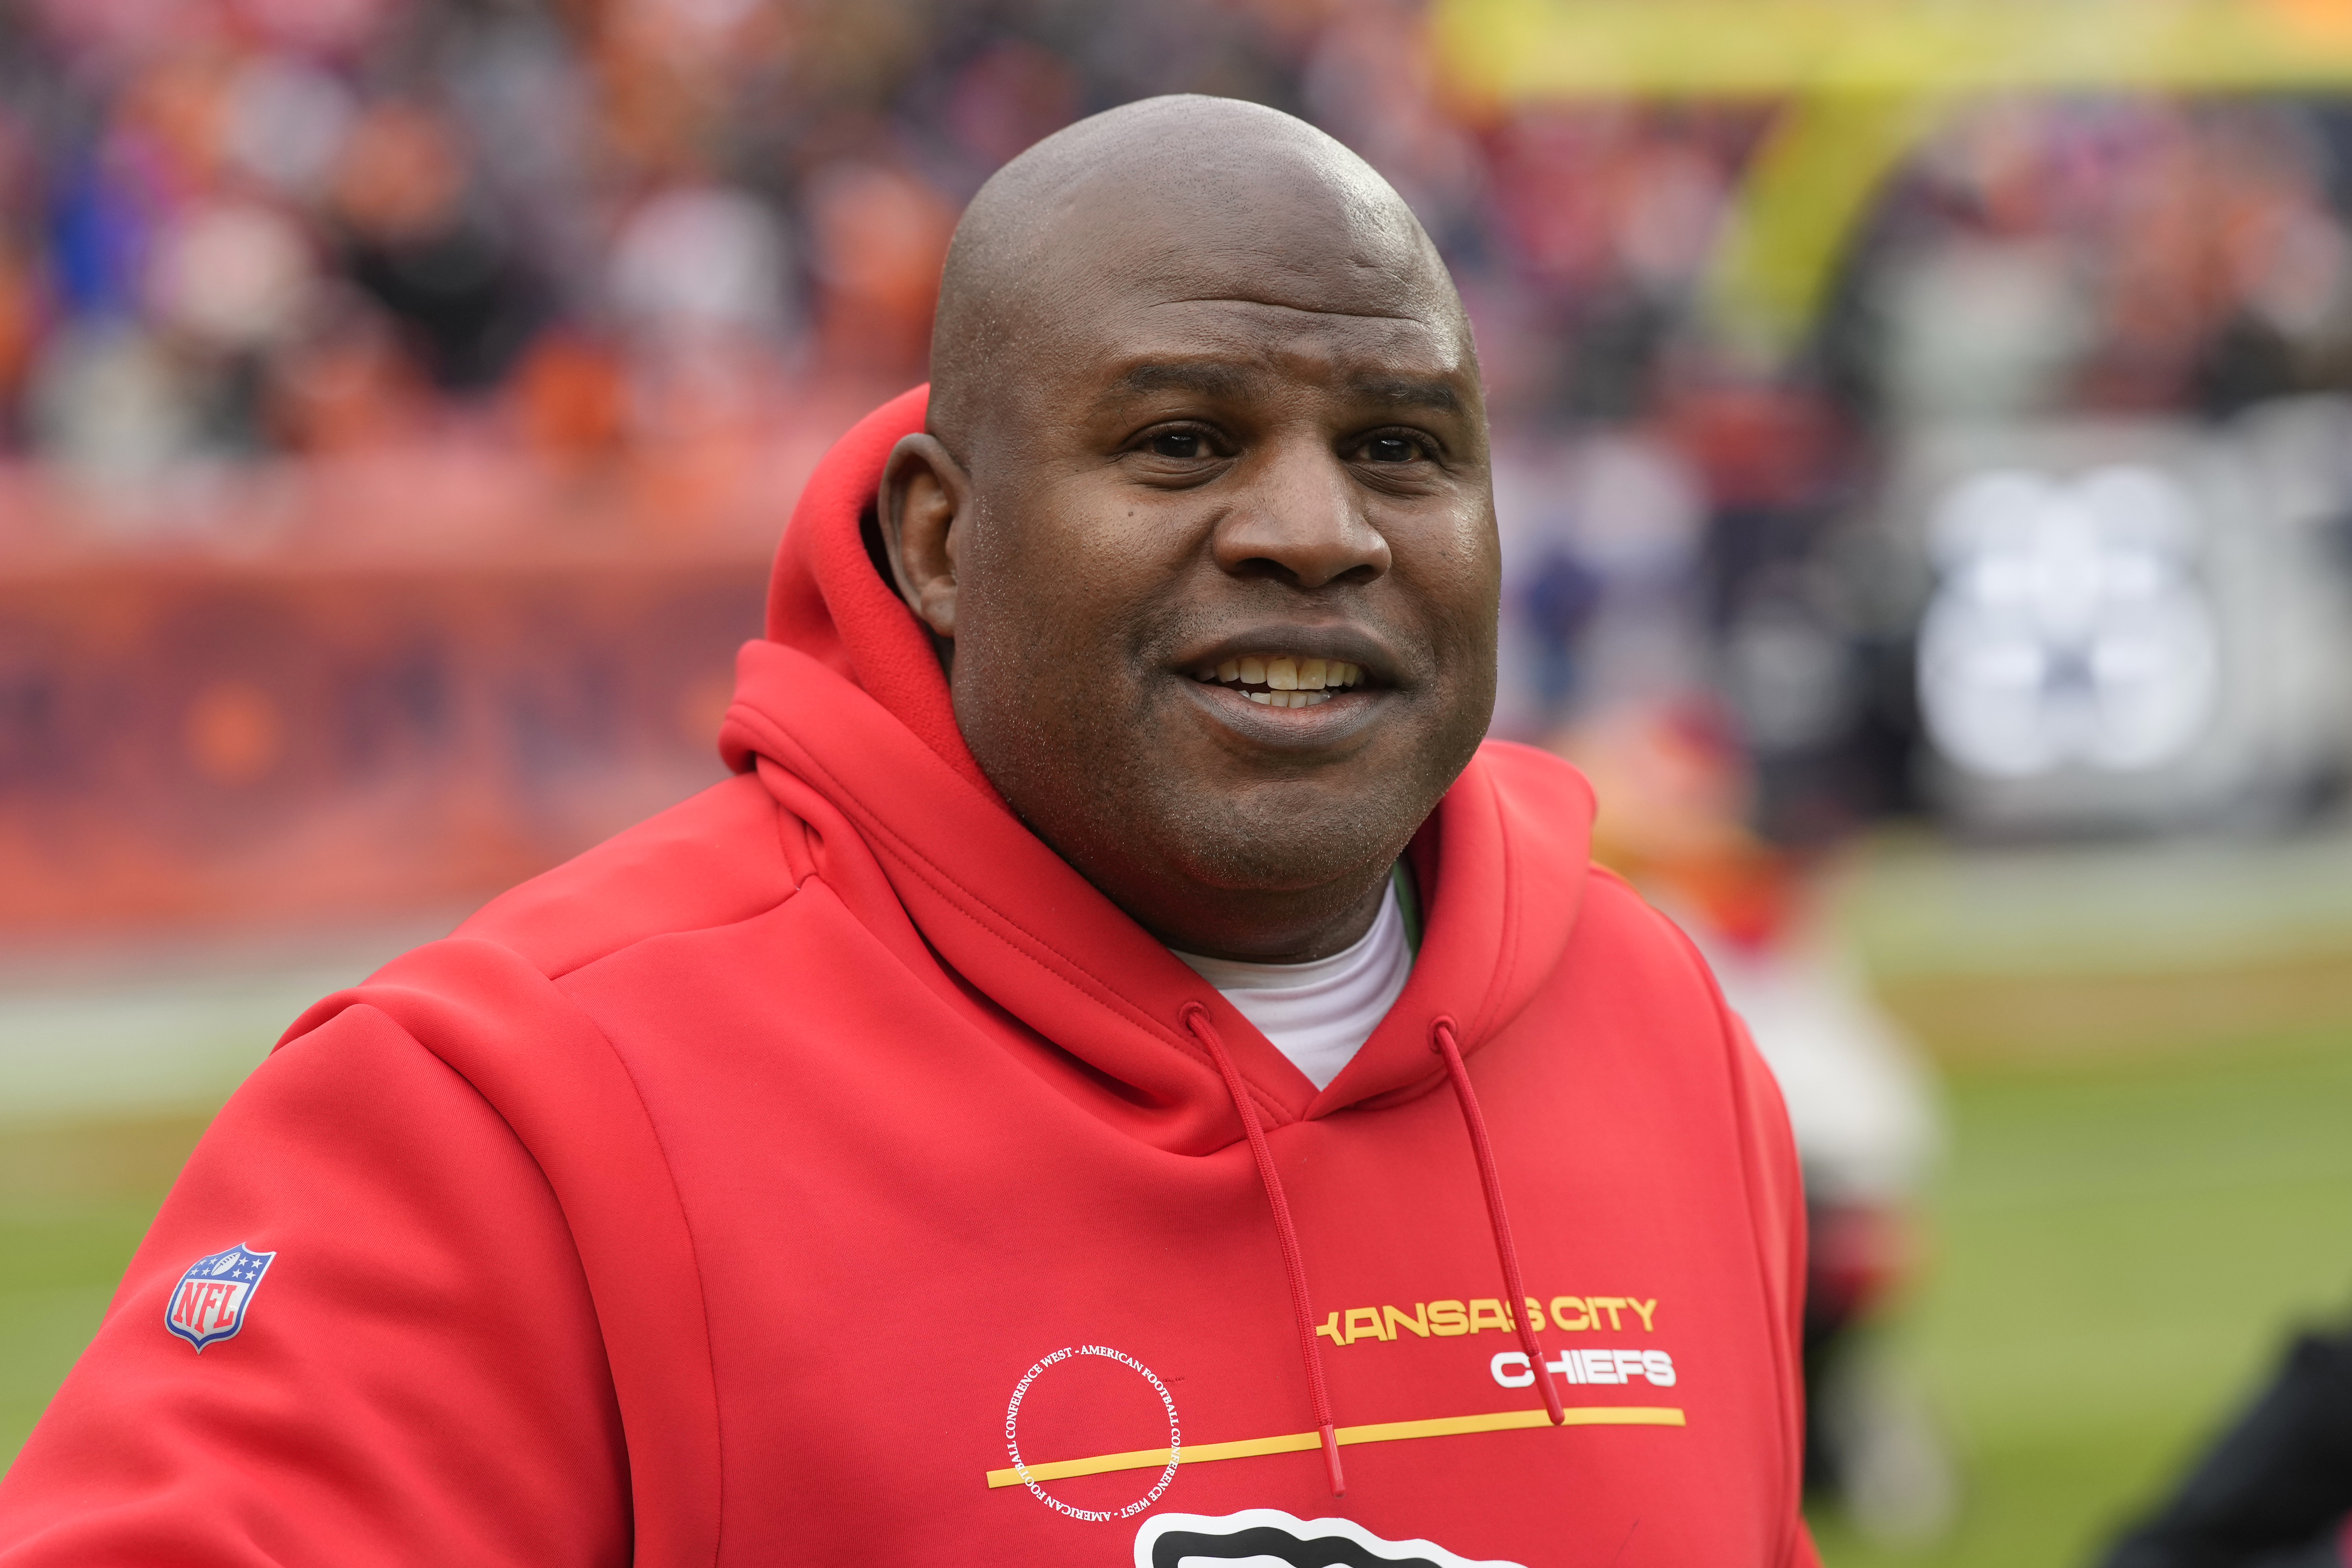 Broncos Rumors: Chiefs OC Eric Bieniemy to Interview Friday for HC Position